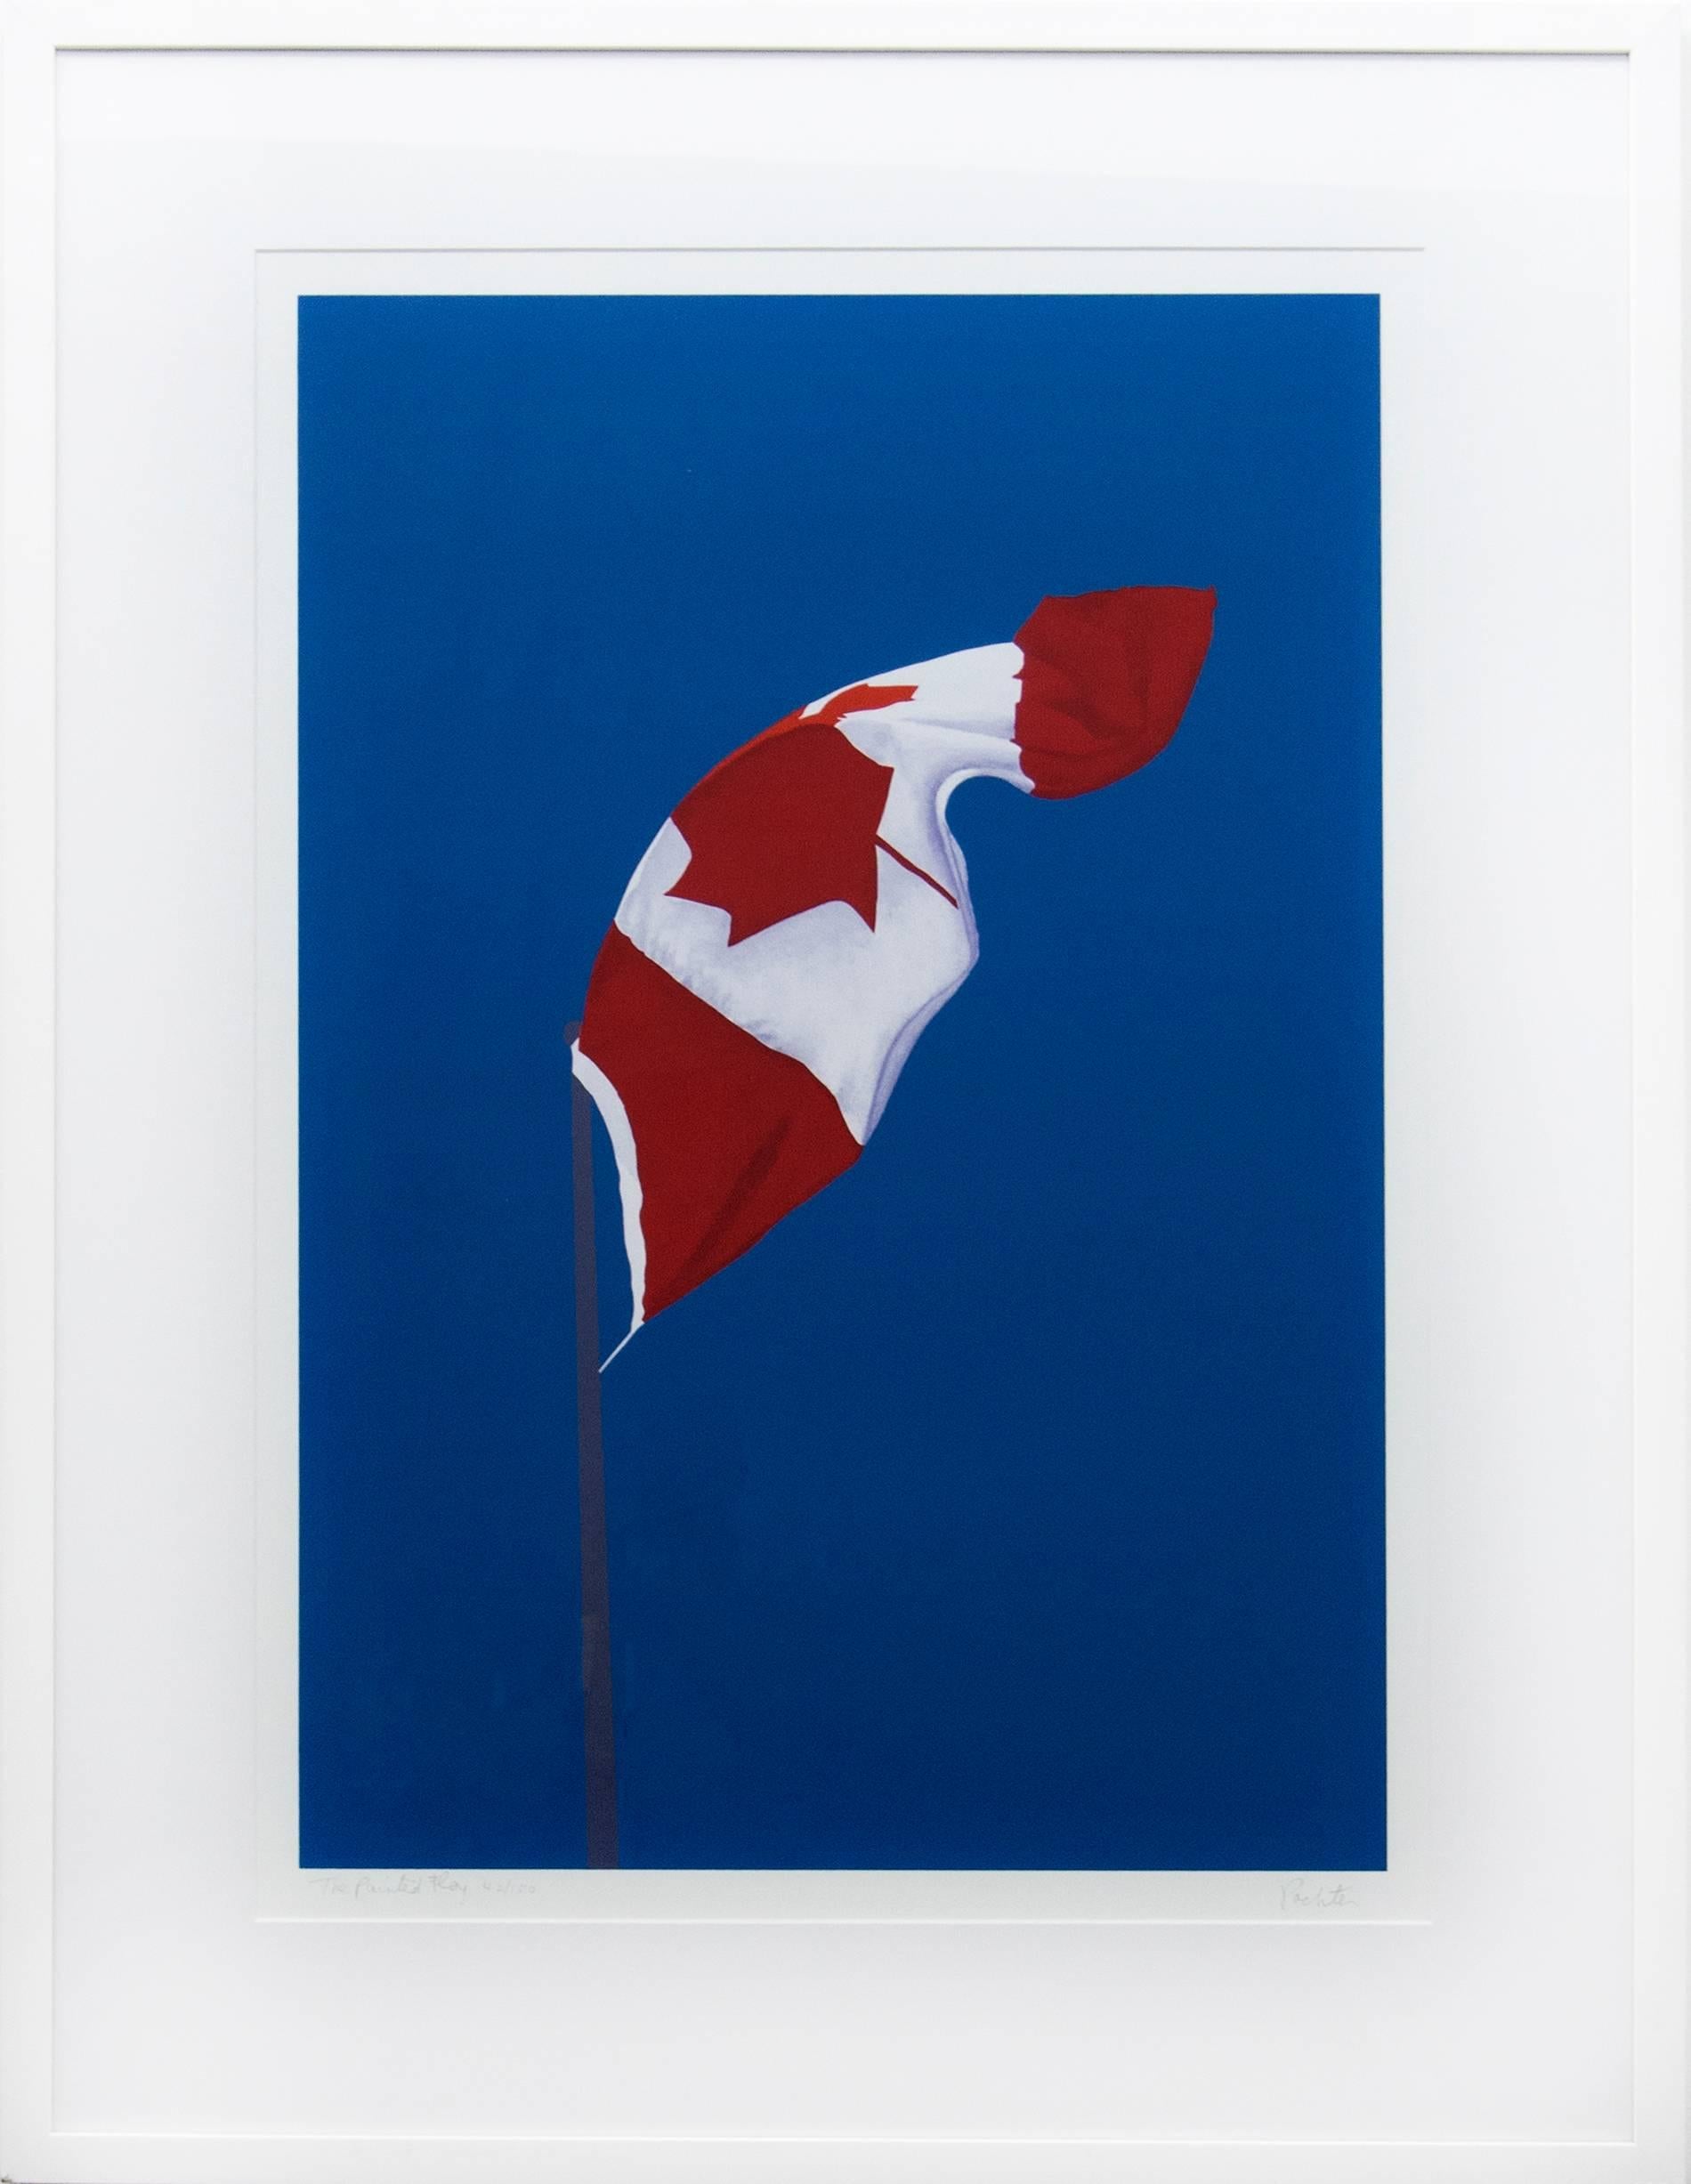 The Painted Flag  - Print by Charles Pachter